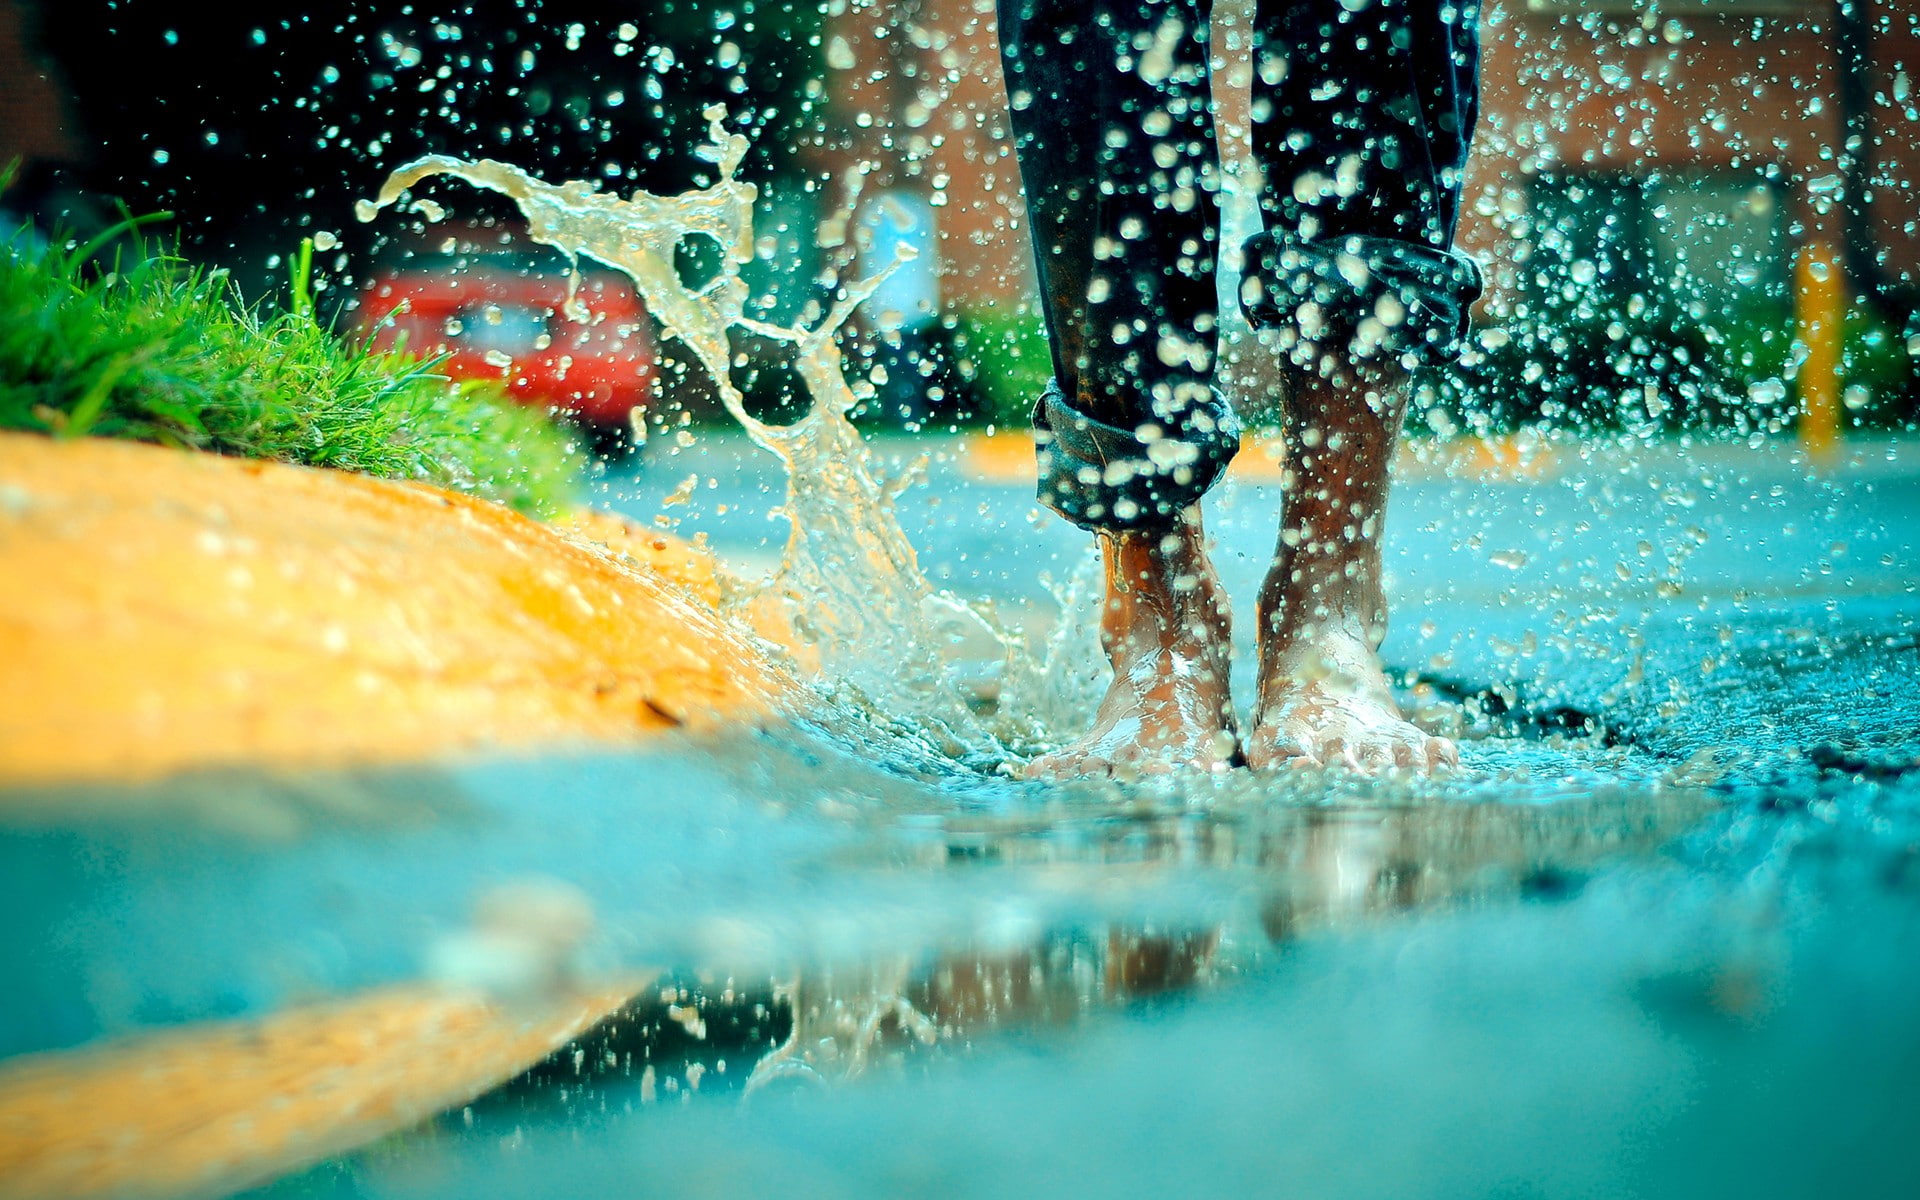 legs, splashes, puddle, barefoot, water drops